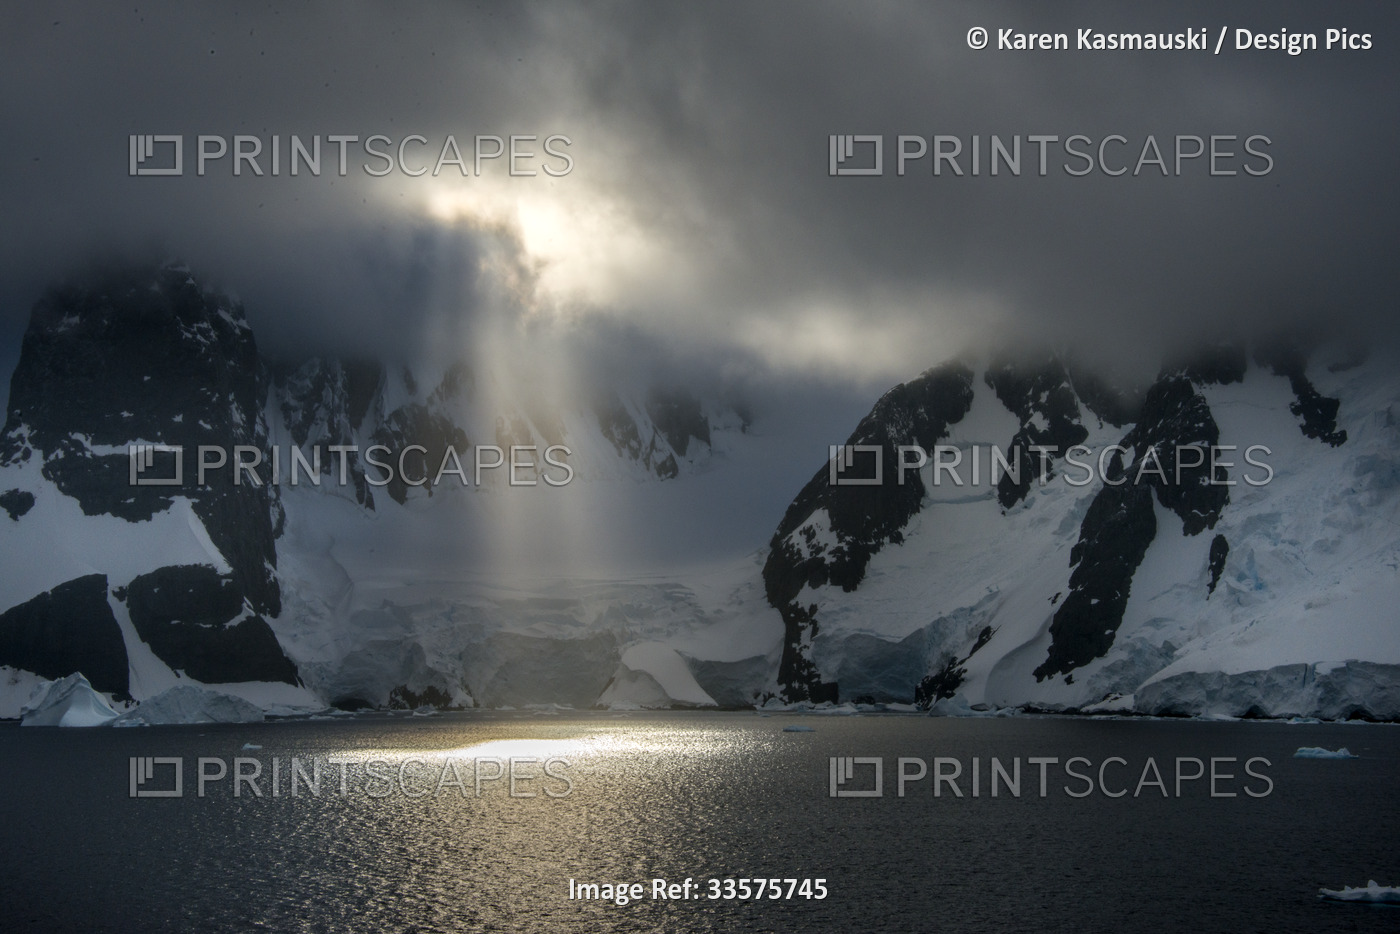 Early morning sun breaking through cloud cover in Antarctica's Lemaire Channel; ...